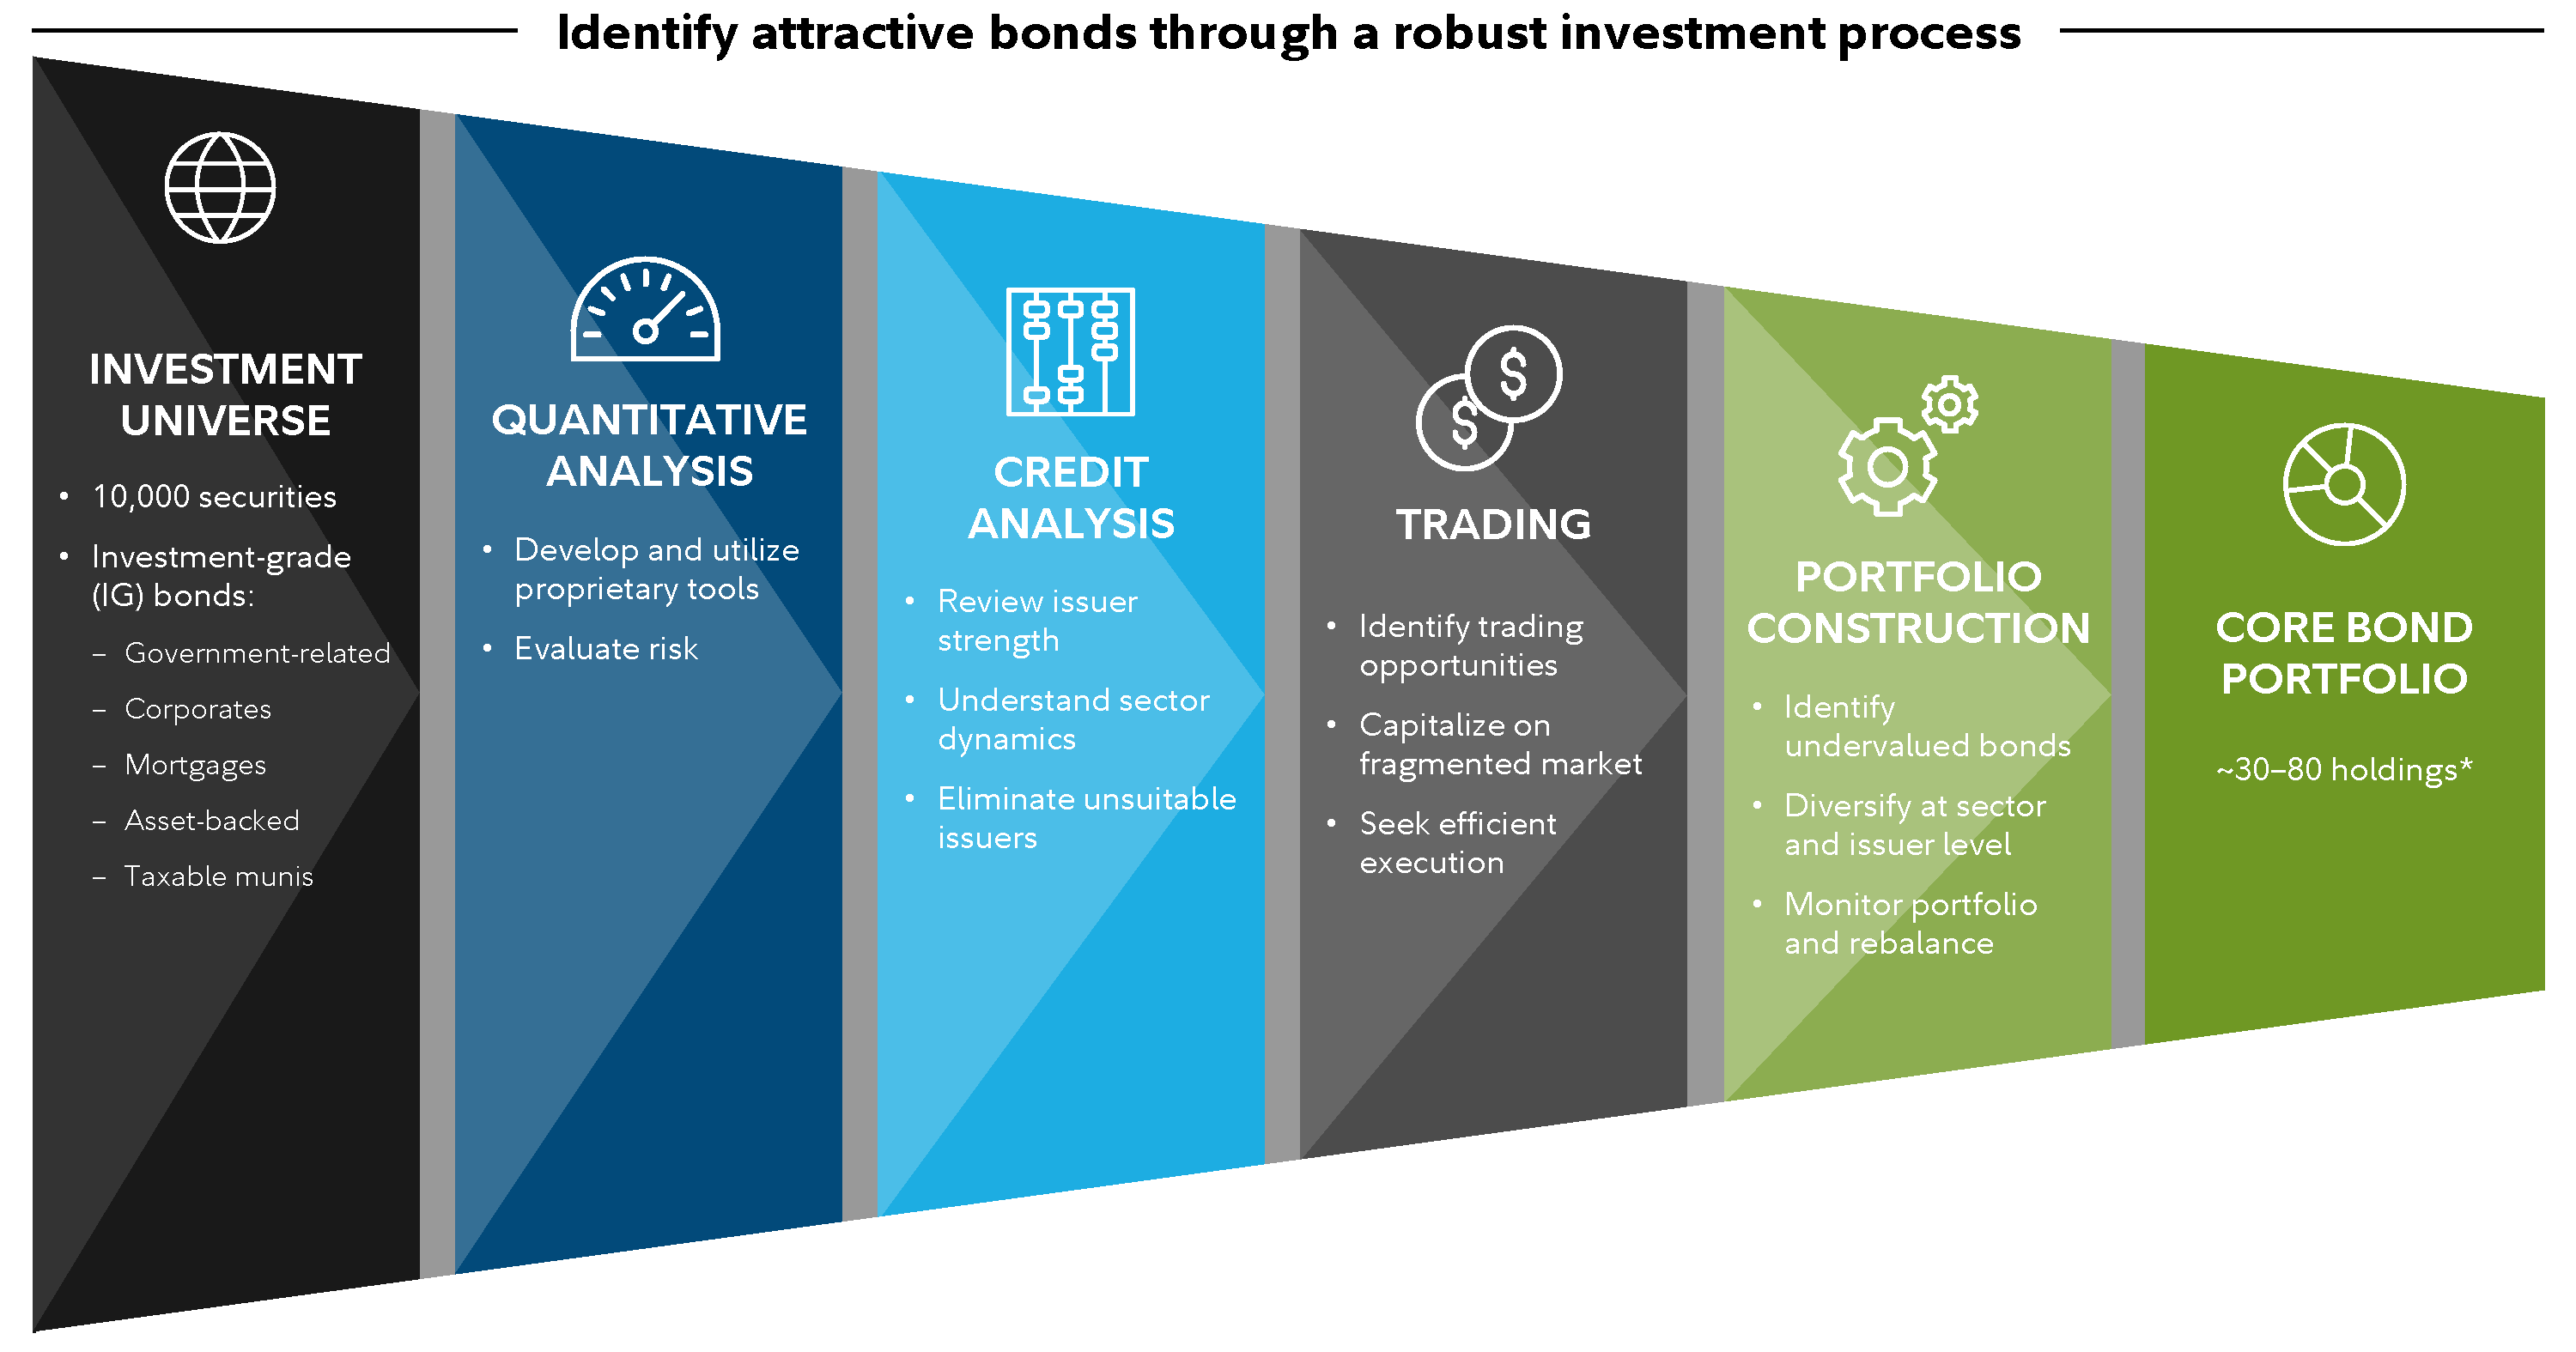 Investment Process chart displays the 6 elements of our investment process for the Fidelity Core Bond Strategy - Investment Universe, Quantitative Analysis, Credit Analysis, Trading, Portfolio Construction, and Core Bond Portfolio. a. In reviewing the universe of potential investments, we research roughly 10,000 fixed income securities, focusing on investment grade bonds. These include government-related bonds, corporate bonds, municipal bonds, bonds backed by mortgages, asset-backed bonds, and taxable municipal bonds. b. When performing quantitative analysis, we develop and utilize proprietary tools in order to evaluate the risk of each bond in the portfolio. c. When performing credit analysis, we analyze and evaluate the strength of the issuer, seek to understand the dynamics of the dynamics of a bond’s sector, and work to eliminate unsuitable issuers that don’t meet our investment criteria. d. Our trading process involves identifying trading opportunities, capitalizing on fragmented market conditions that allow us to find and leverage these opportunities. We then focus on efficient executions in an effort to increase returns. e. In constructing portfolios, we seek to identify undervalued bonds, diversify across both sectors and issuers, and then continually monitor each account, rebalancing as needed. f. Each core bond portfolio will contain approximately 30 to 80 holdings.